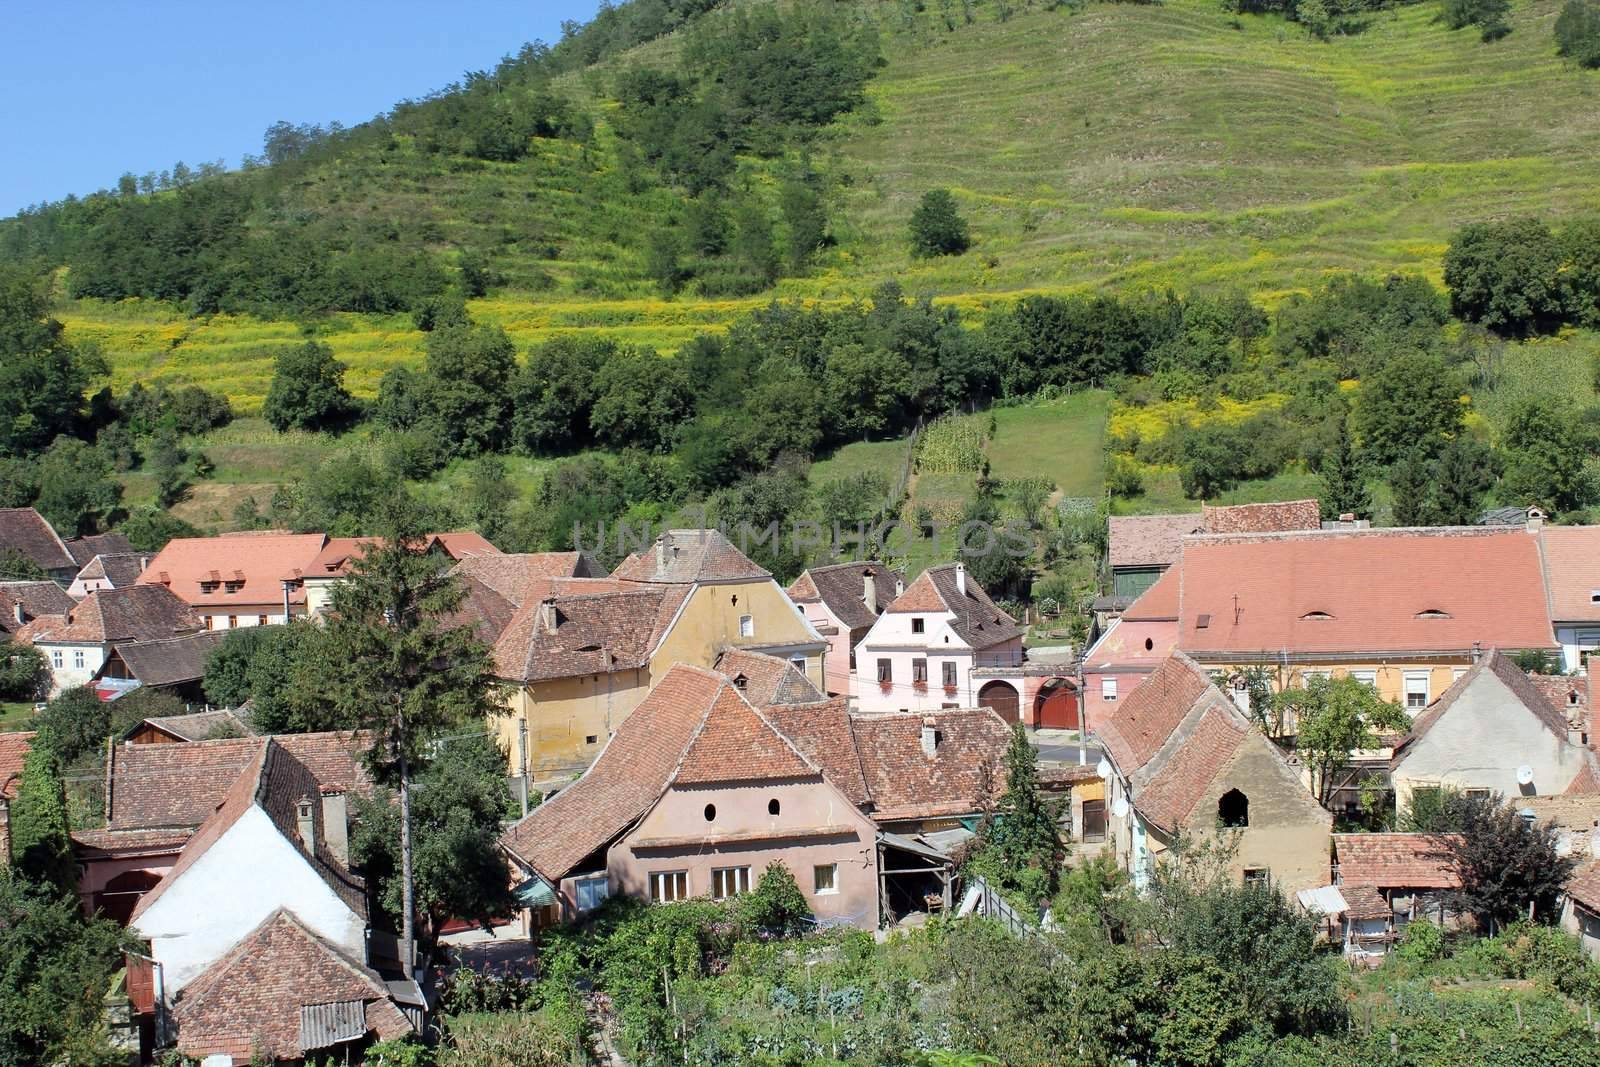 View from the village of Biertan, Transylvania